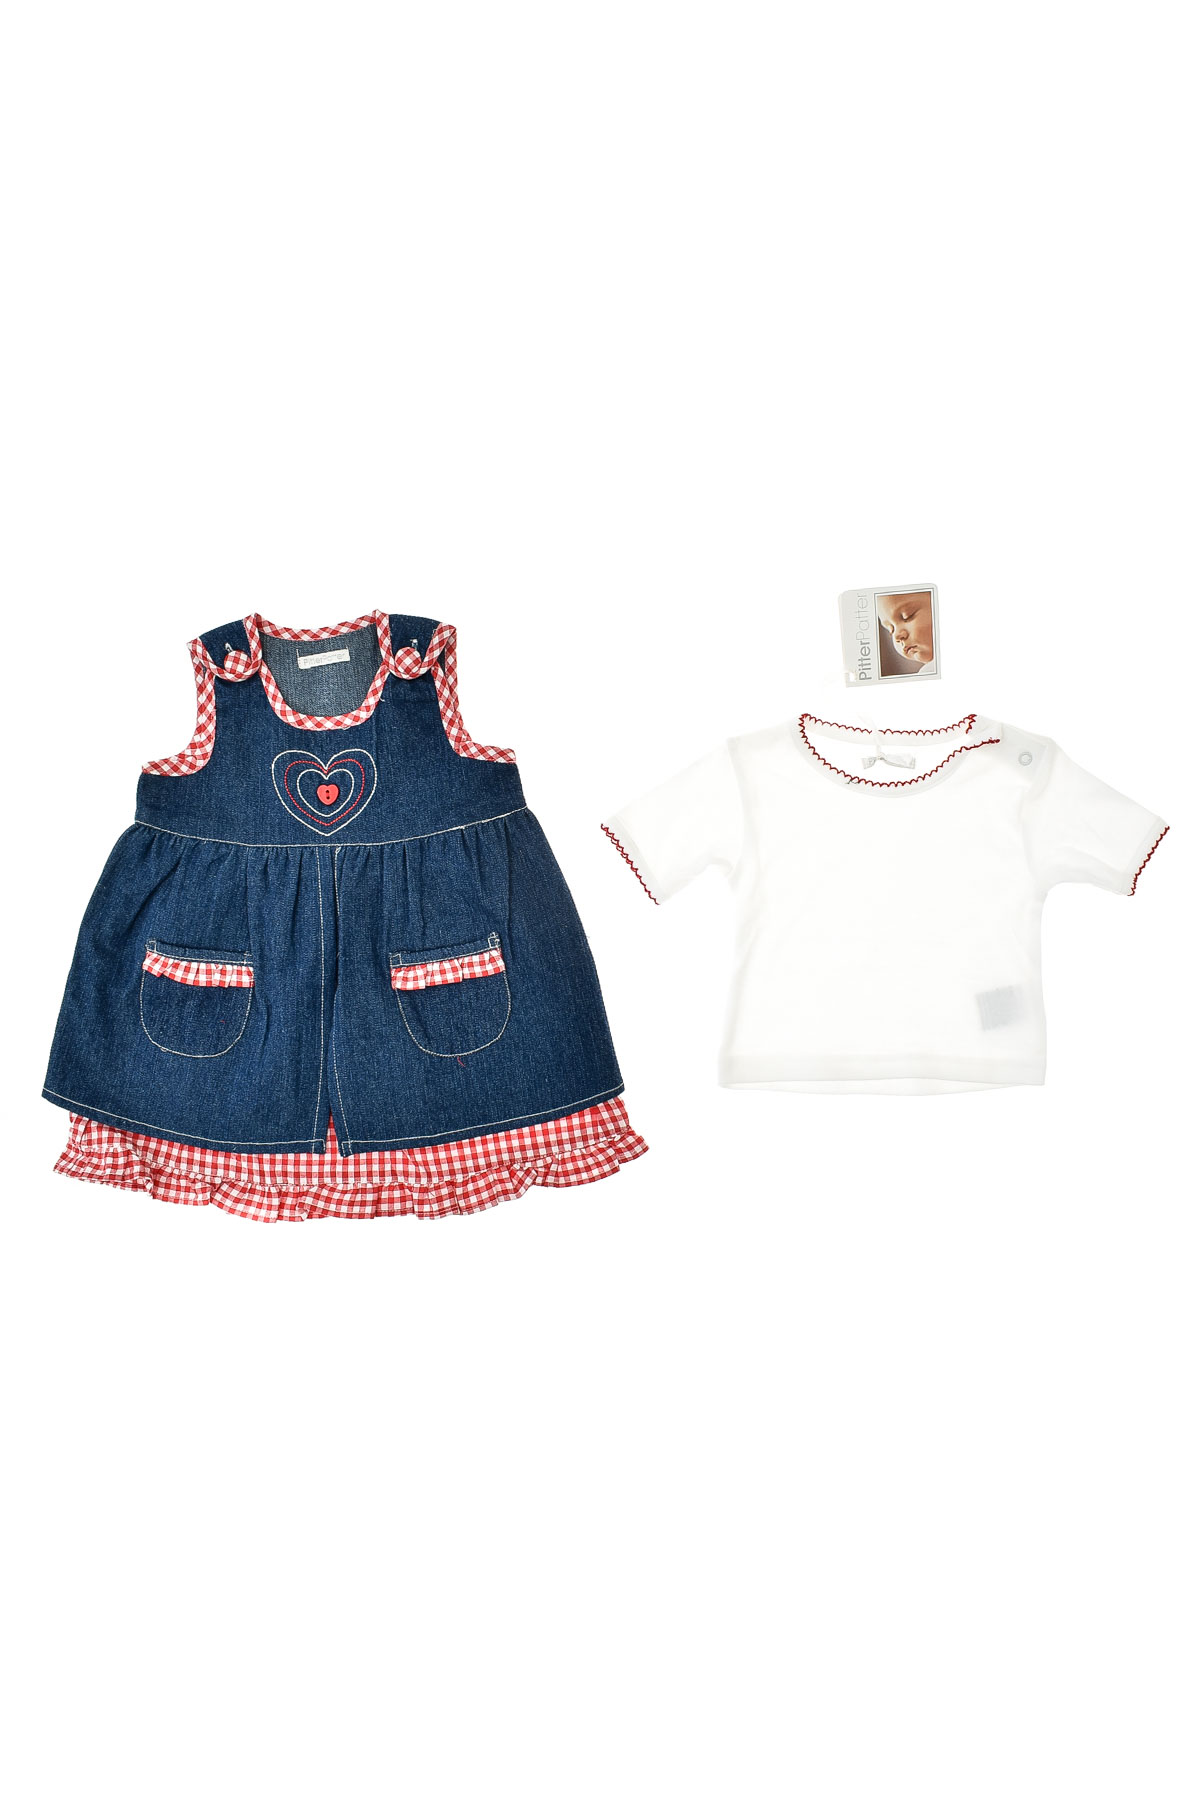 Baby's dress - Pitter Patter - 4